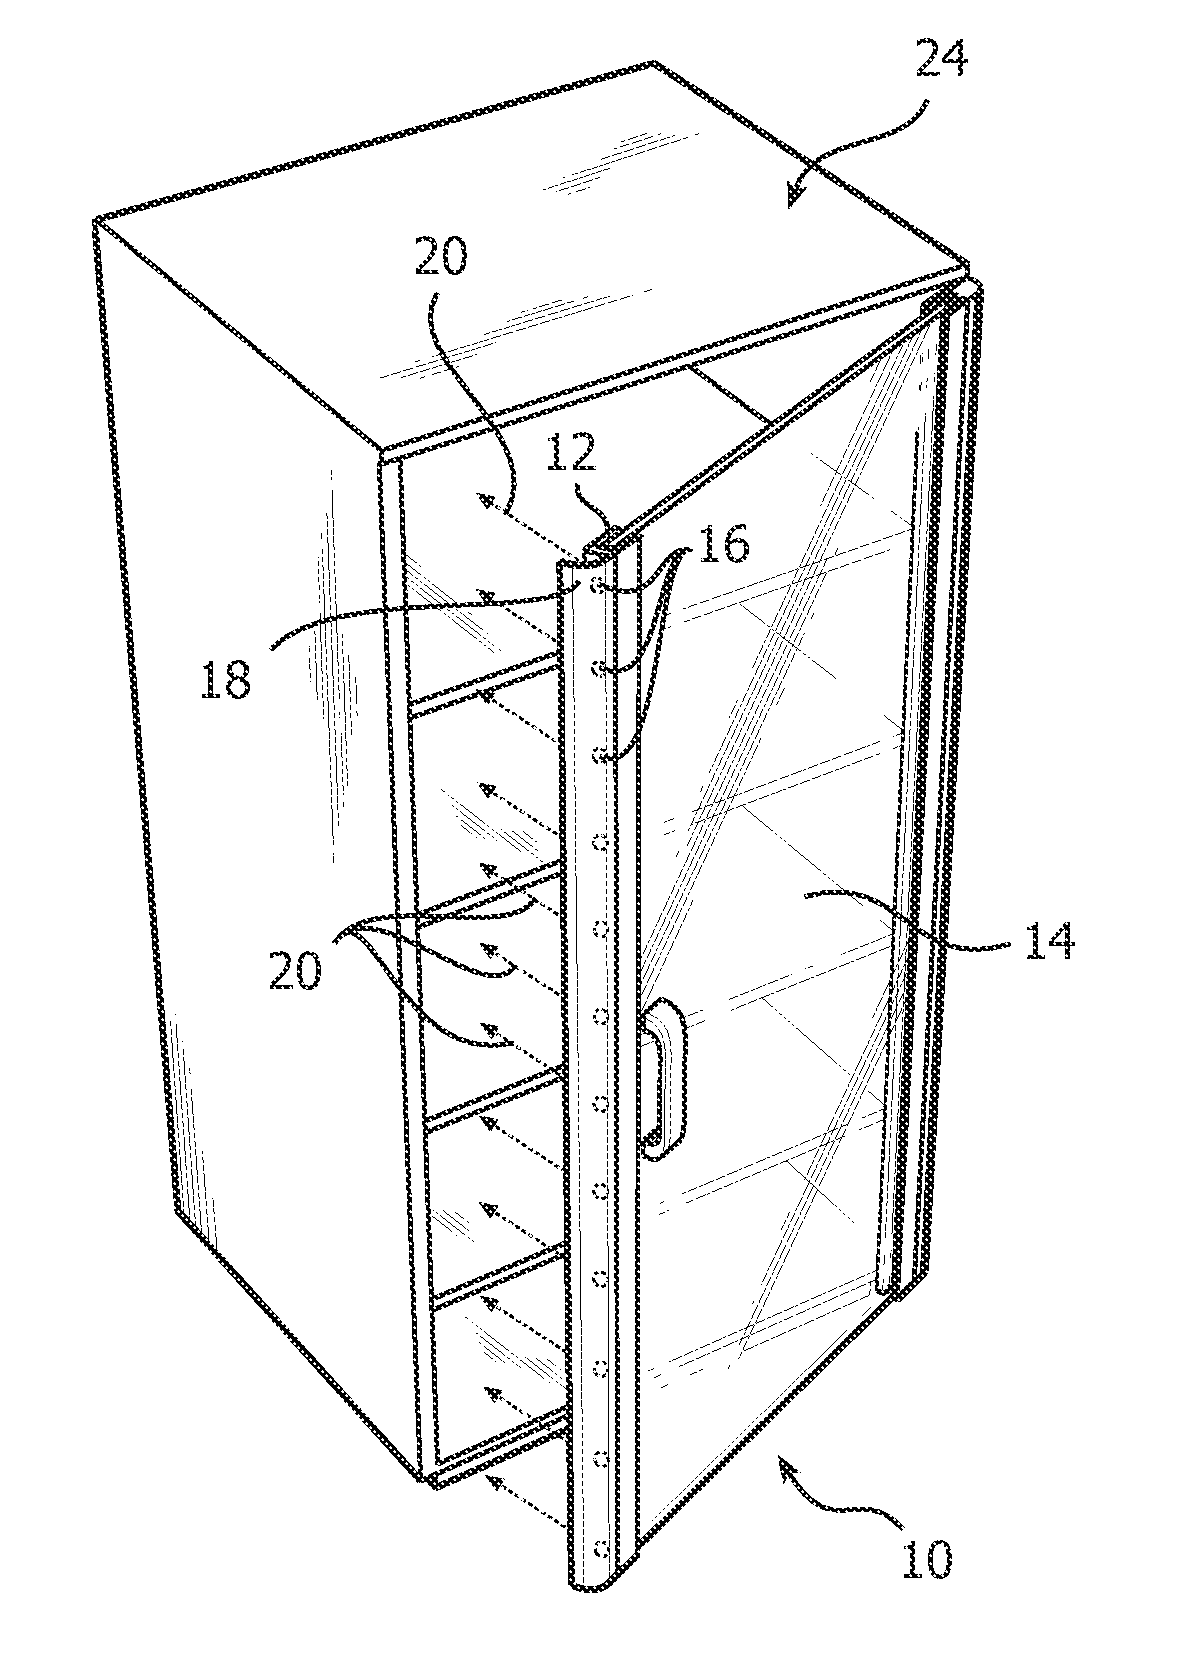 Door for a cold storage device such as a refrigerator or freezer